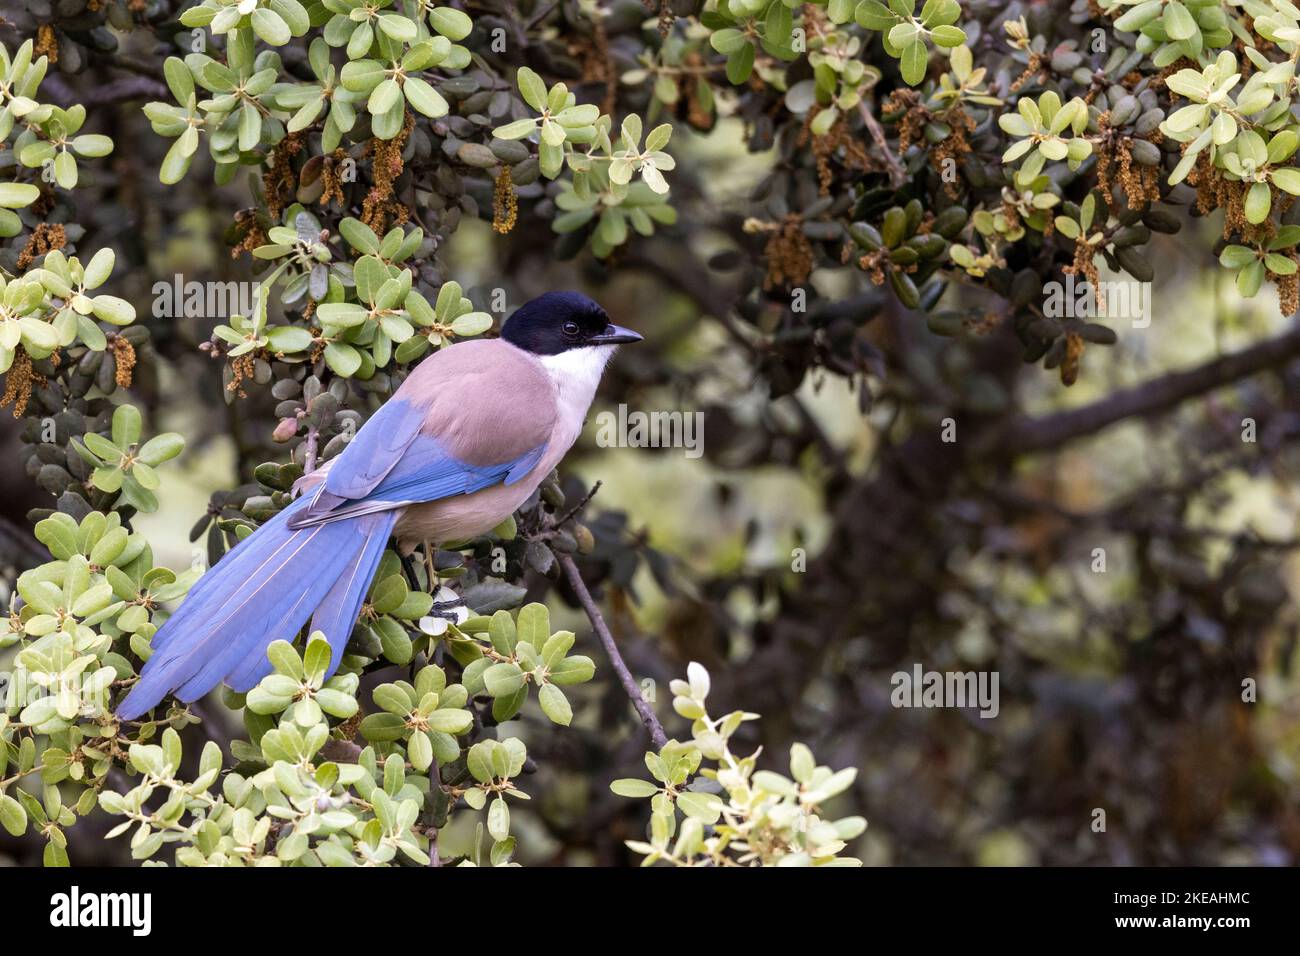 azure-winged magpie (Cyanopica cyanus, Cyanopica cyana), perched on a branch of a holm oak foraging, Spain, Extremadura, Caceres, Barruecos Stock Photo